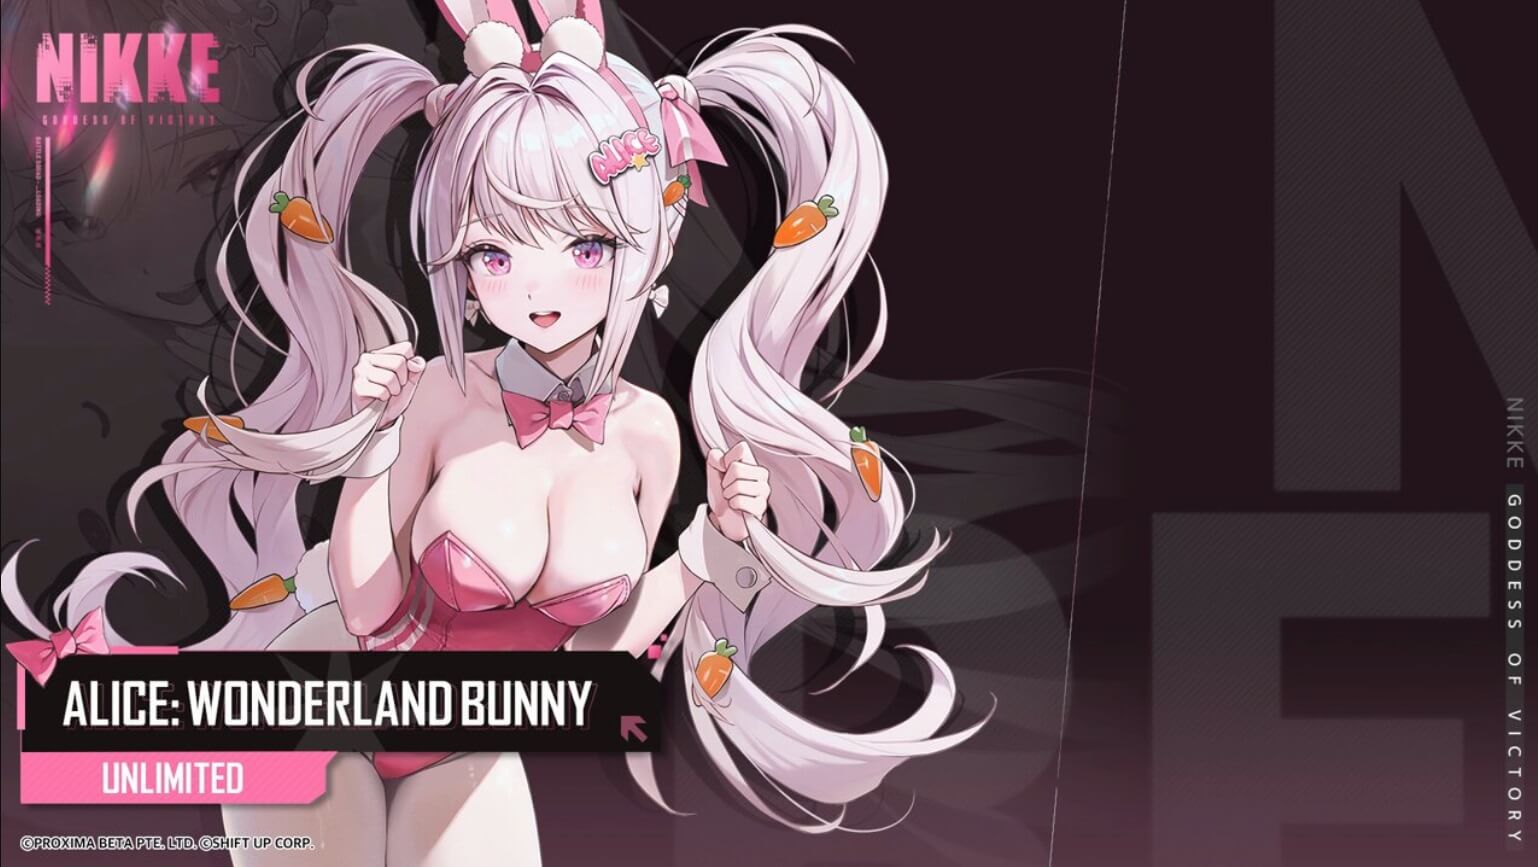 Goddess of Victory Nikke Guide to Alice Wonderland Bunny Character Guide